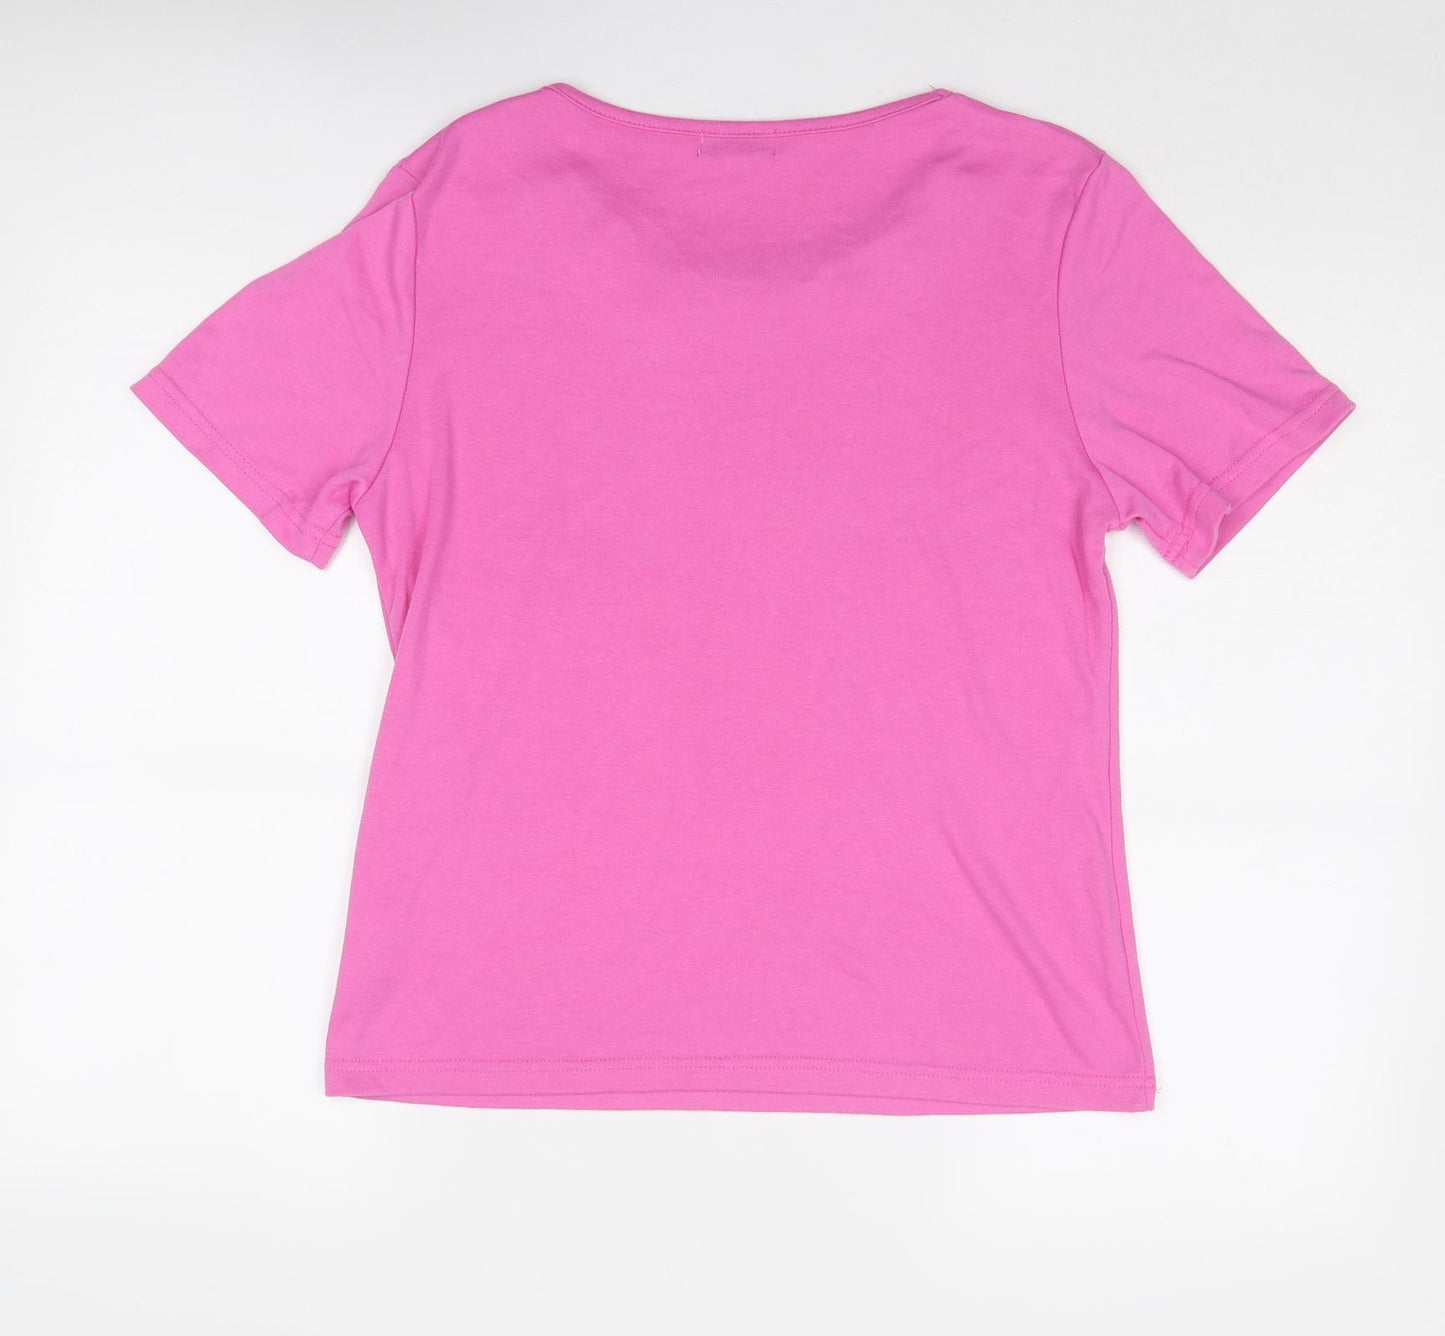 Paramour Womens Pink Polyester Basic T-Shirt Size M Round Neck